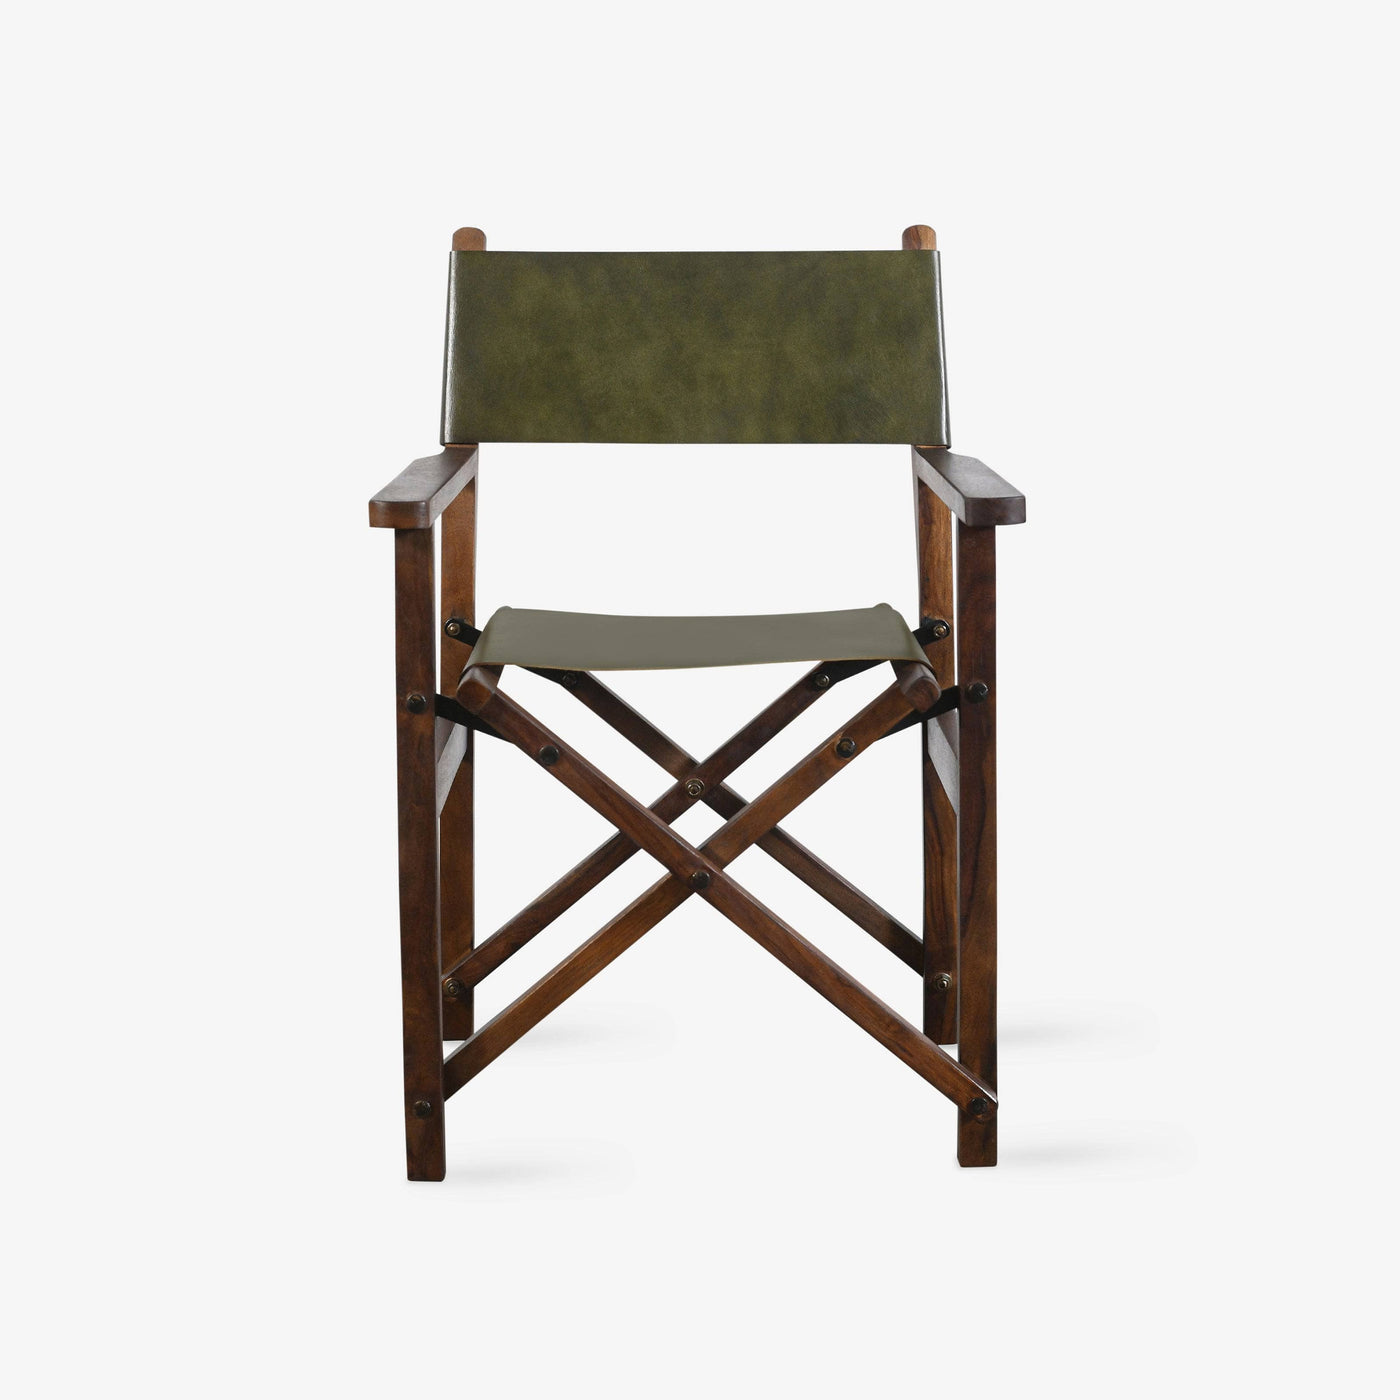 Leather Wooden Armchair, Green, 56x59x84 cm - 1